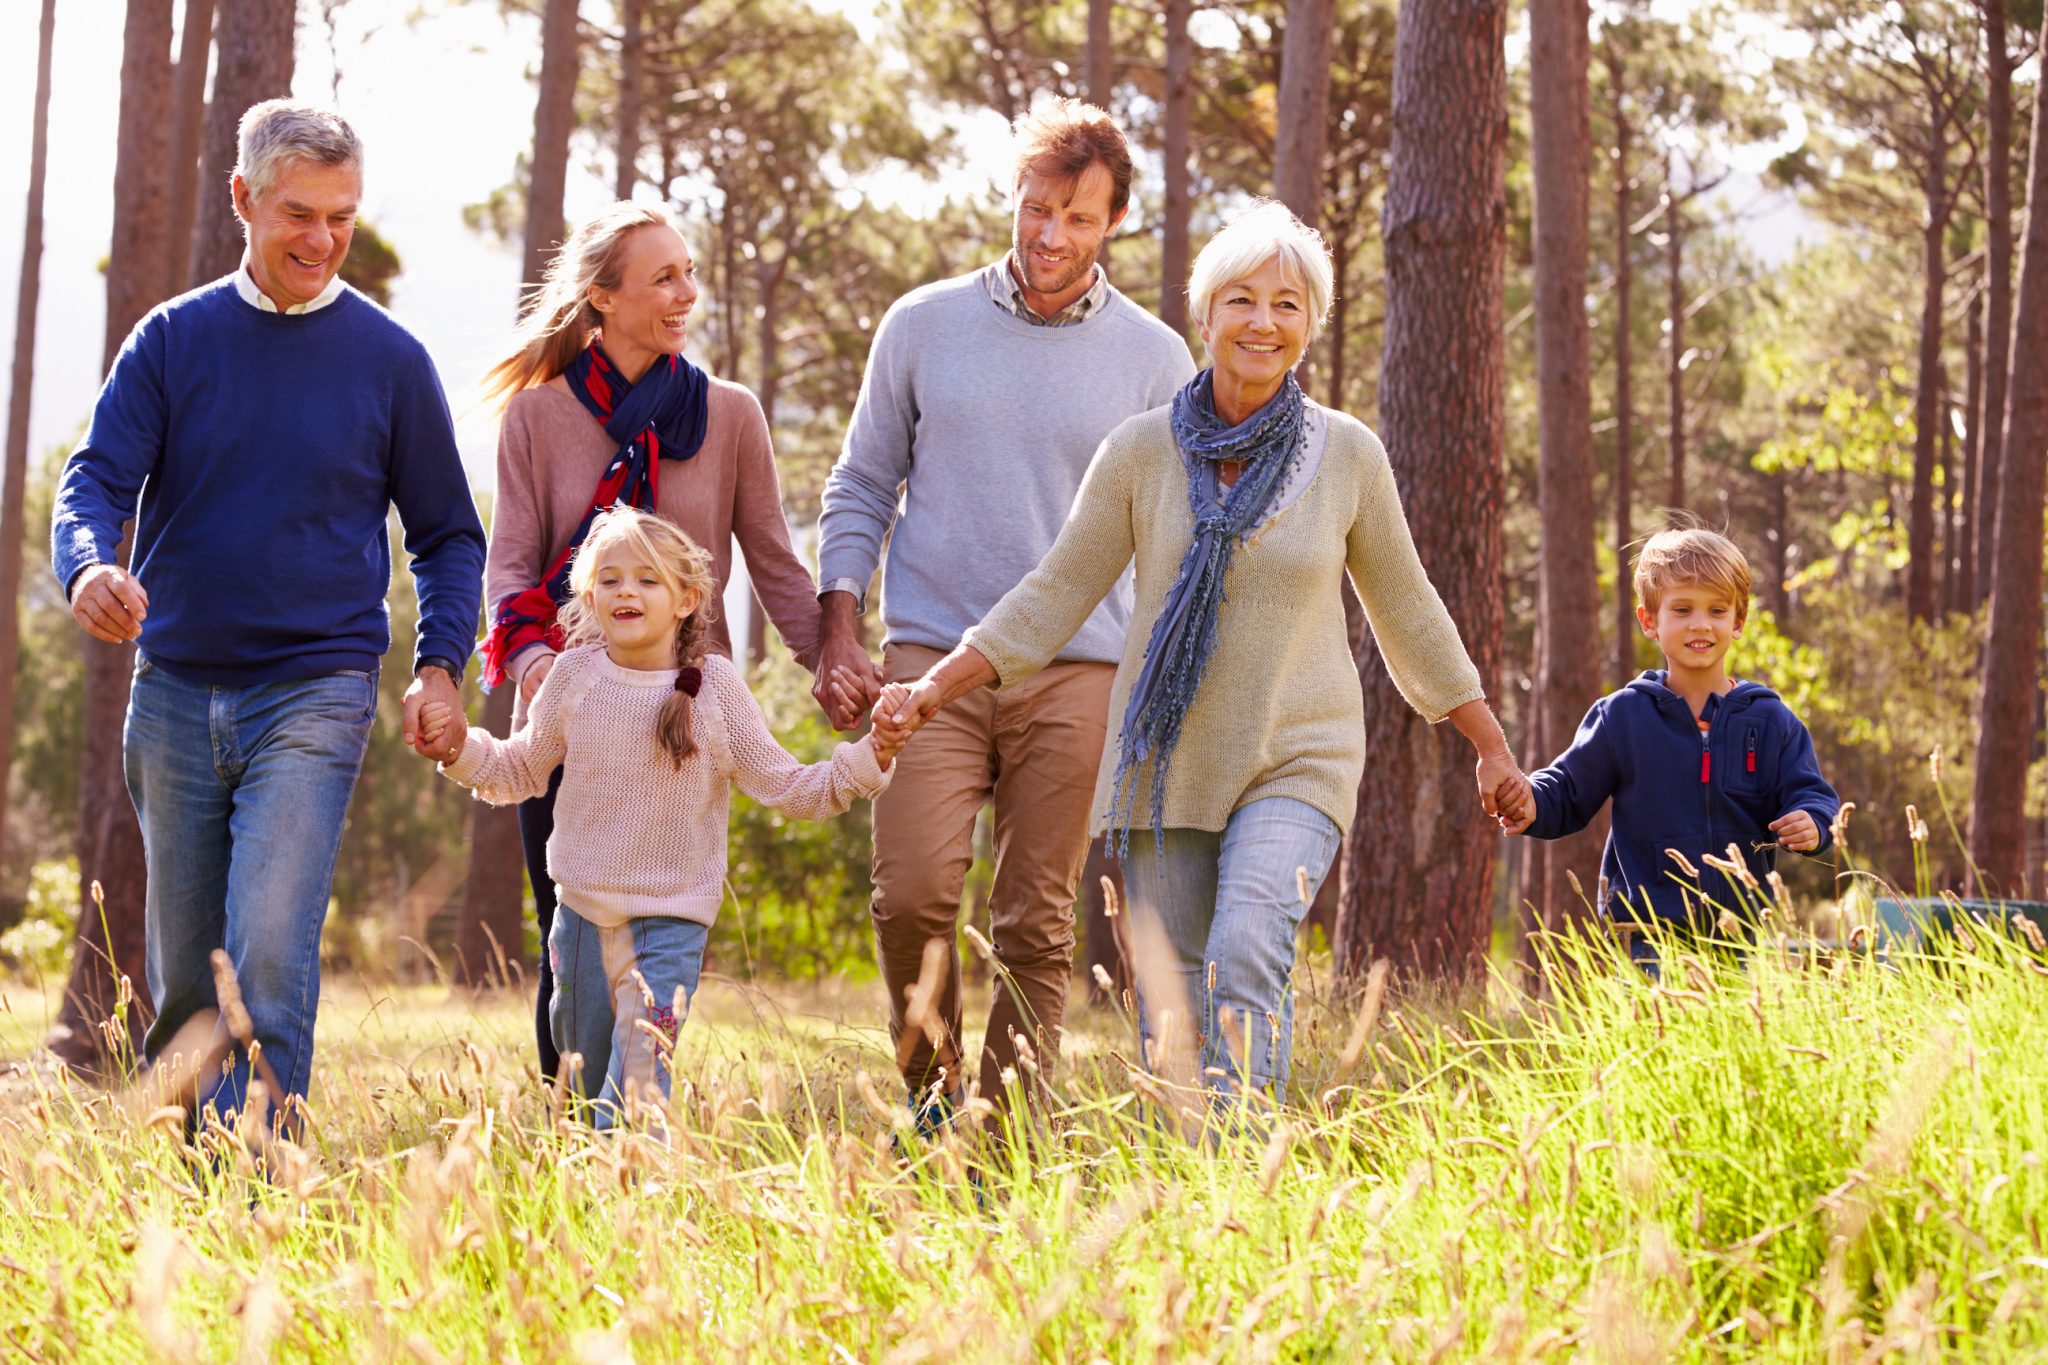 Family of several generations walking hand in hand in nature, laughing